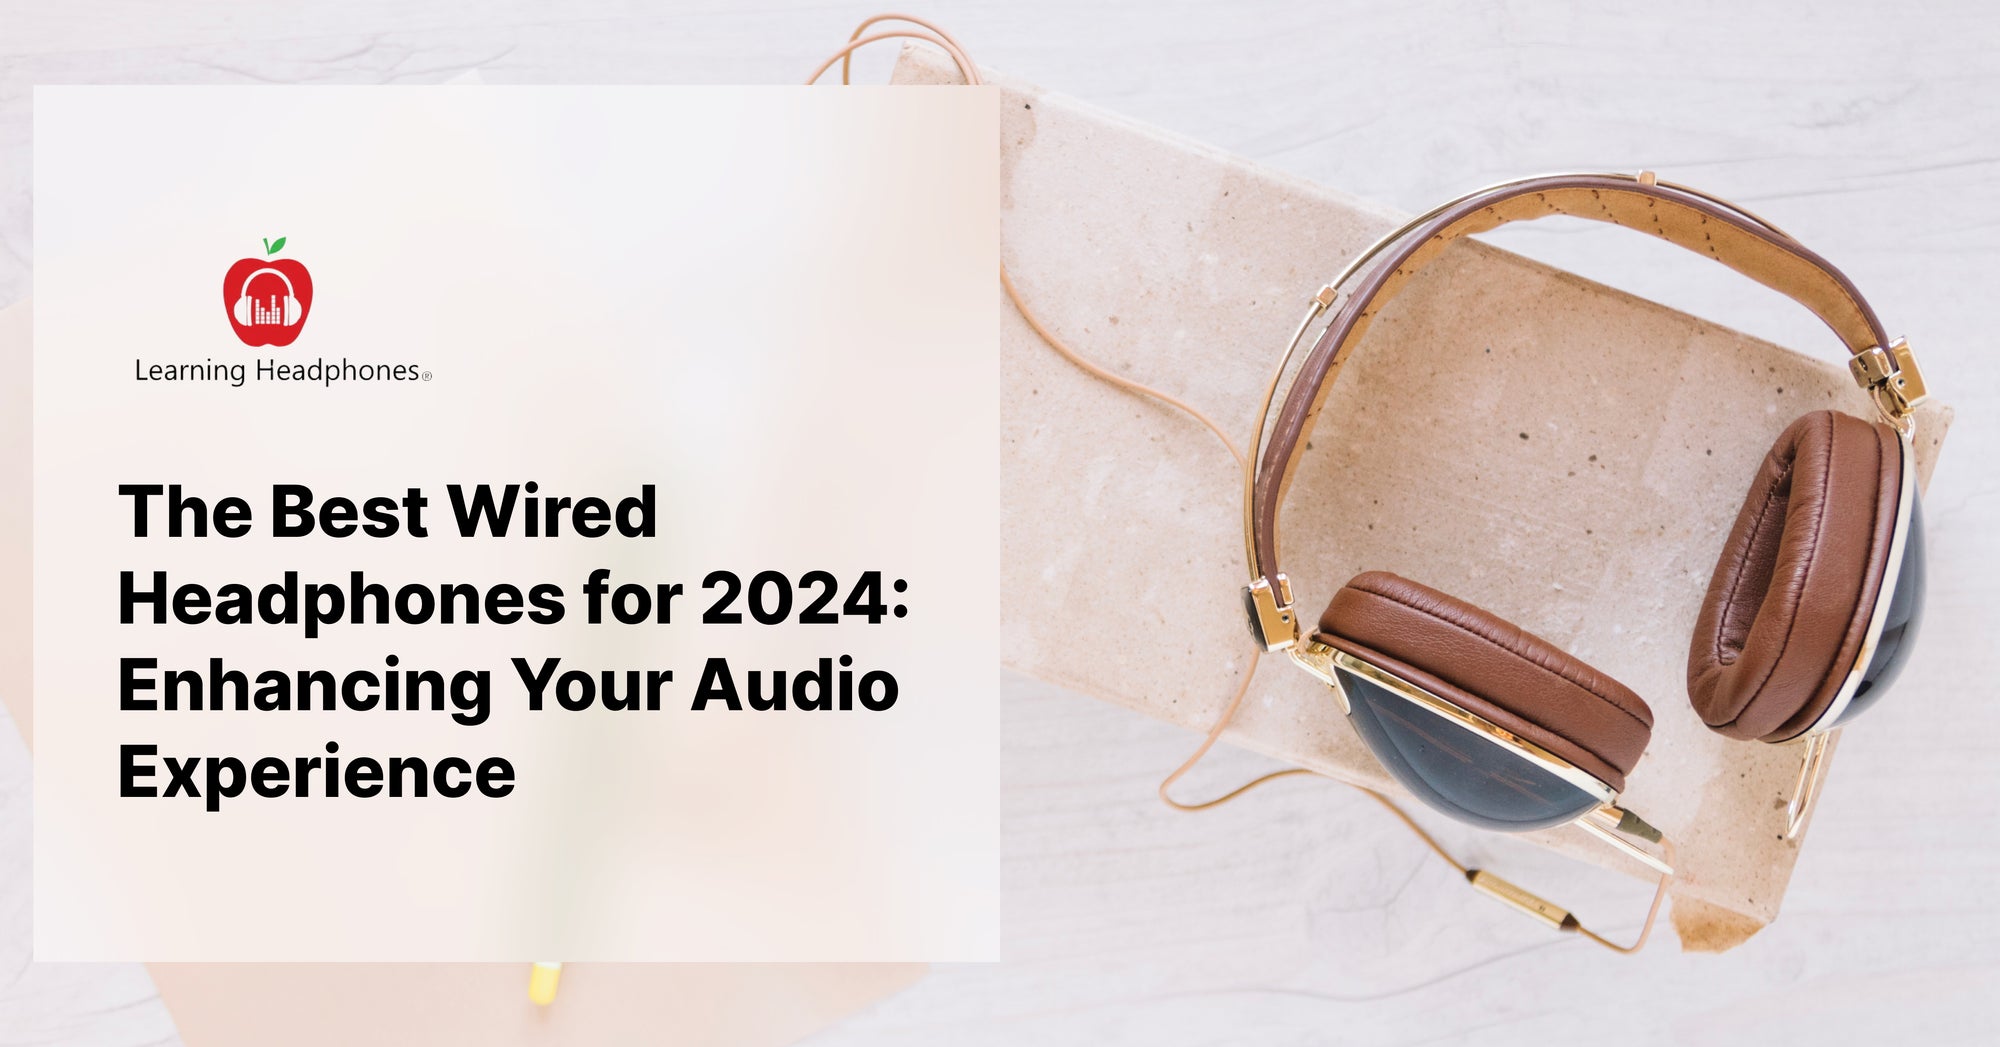 The Best Wired Headphones for 2024: Enhancing Your Audio Experience